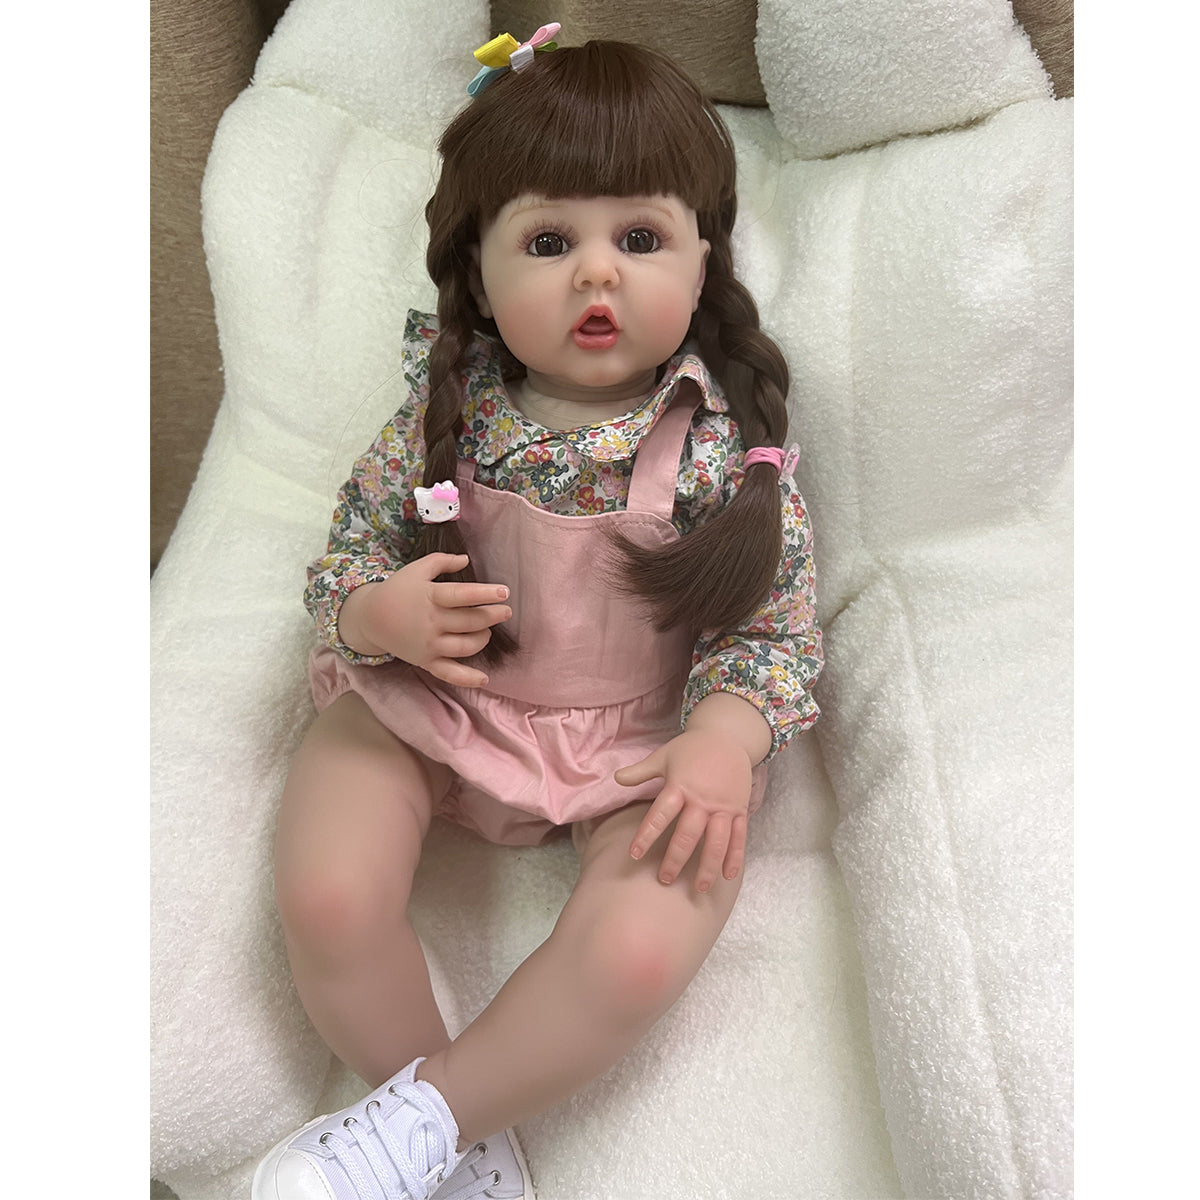 60 cm lifelike baby dolls | reborn baby dolls | realistic baby dolls| newborn baby dolls | real life baby dolls | rebron baby dolls toddler | lifelike toddler dolls | therapy dolls for adults | anatomically correct baby girl doll | infant baby doll | gift for kids ages 3+ girl | reborn baby dolls full body silicone | weighted cloth body | birthday gift | collection | girl | boys |  mother | daughter | granddaughter | sleeping |real look real baby dolls that look real looking | reborn toddler dolls | mnmj